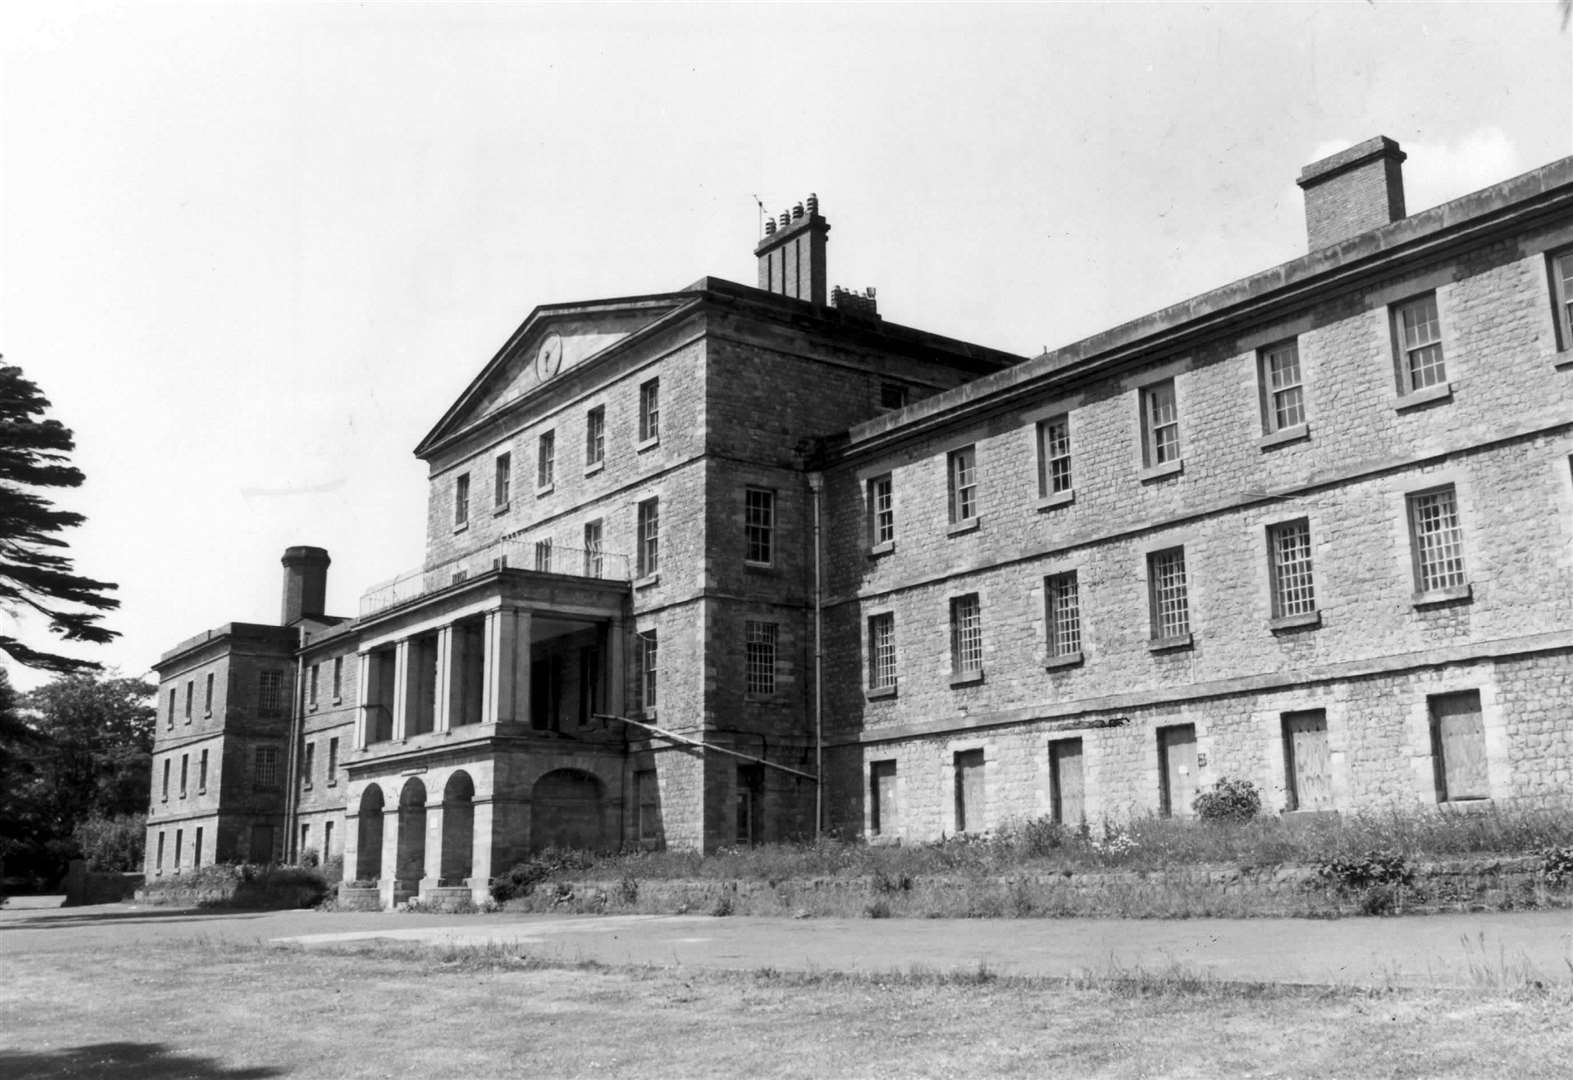 Oakwood Hospital, Maidstone in 1990 just four years before it closed and was converted into flats